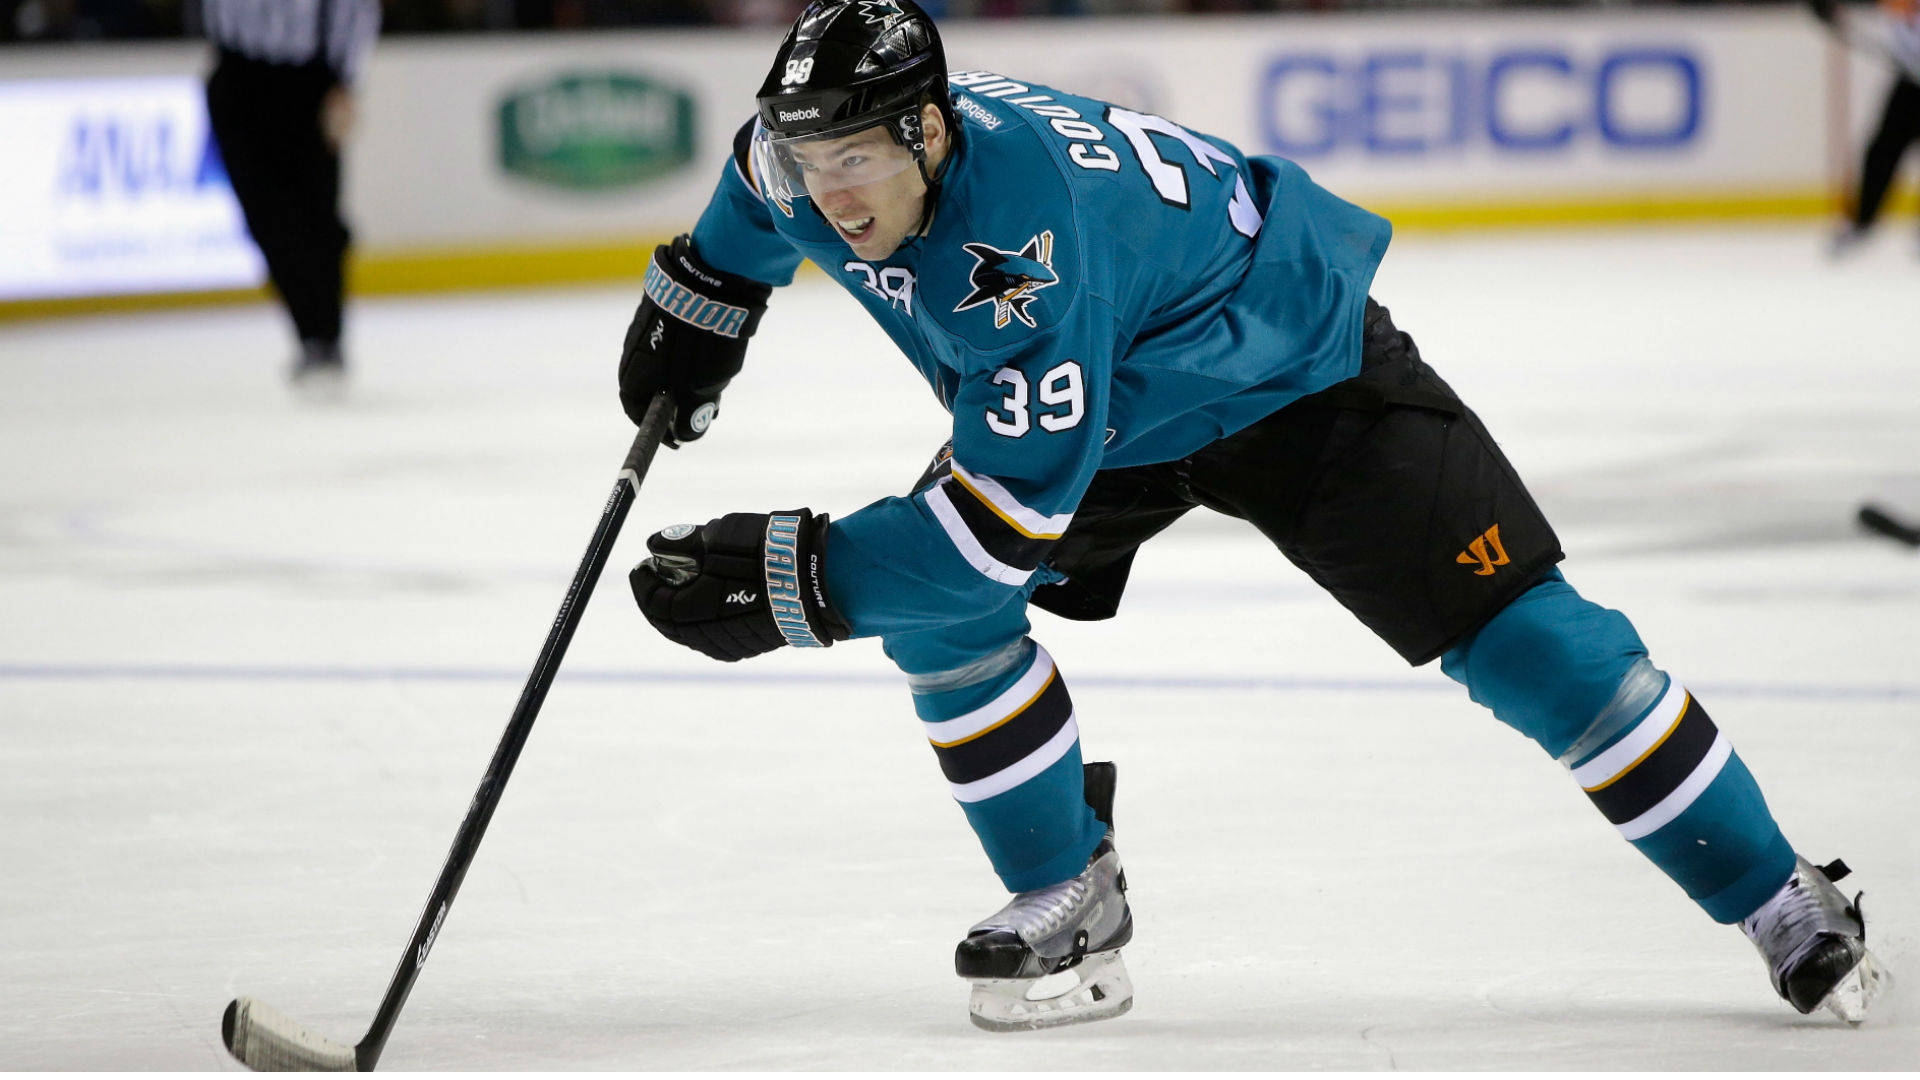 Canadian Professional Ice Hockey Center Logan Couture Playing On Rink Background